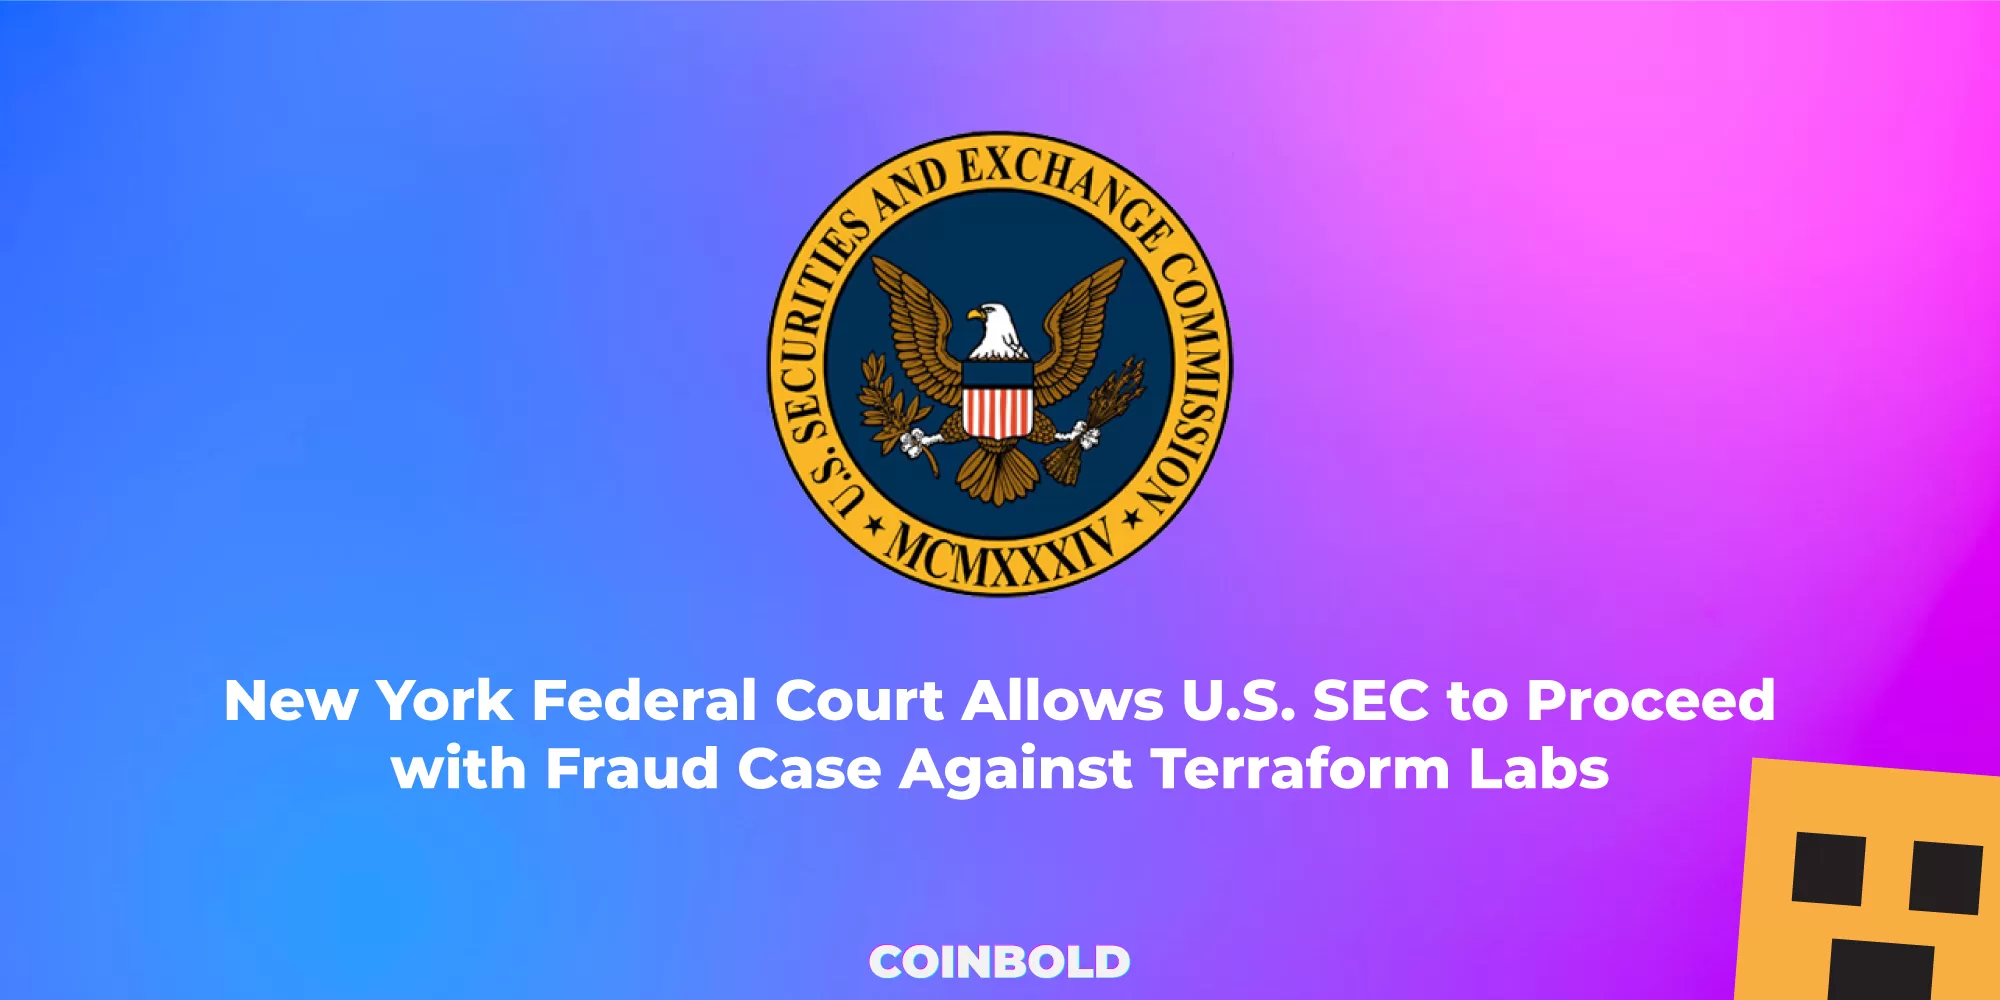 New York Federal Court Allows U.S. SEC to Proceed with Fraud Case Against Terraform Labs